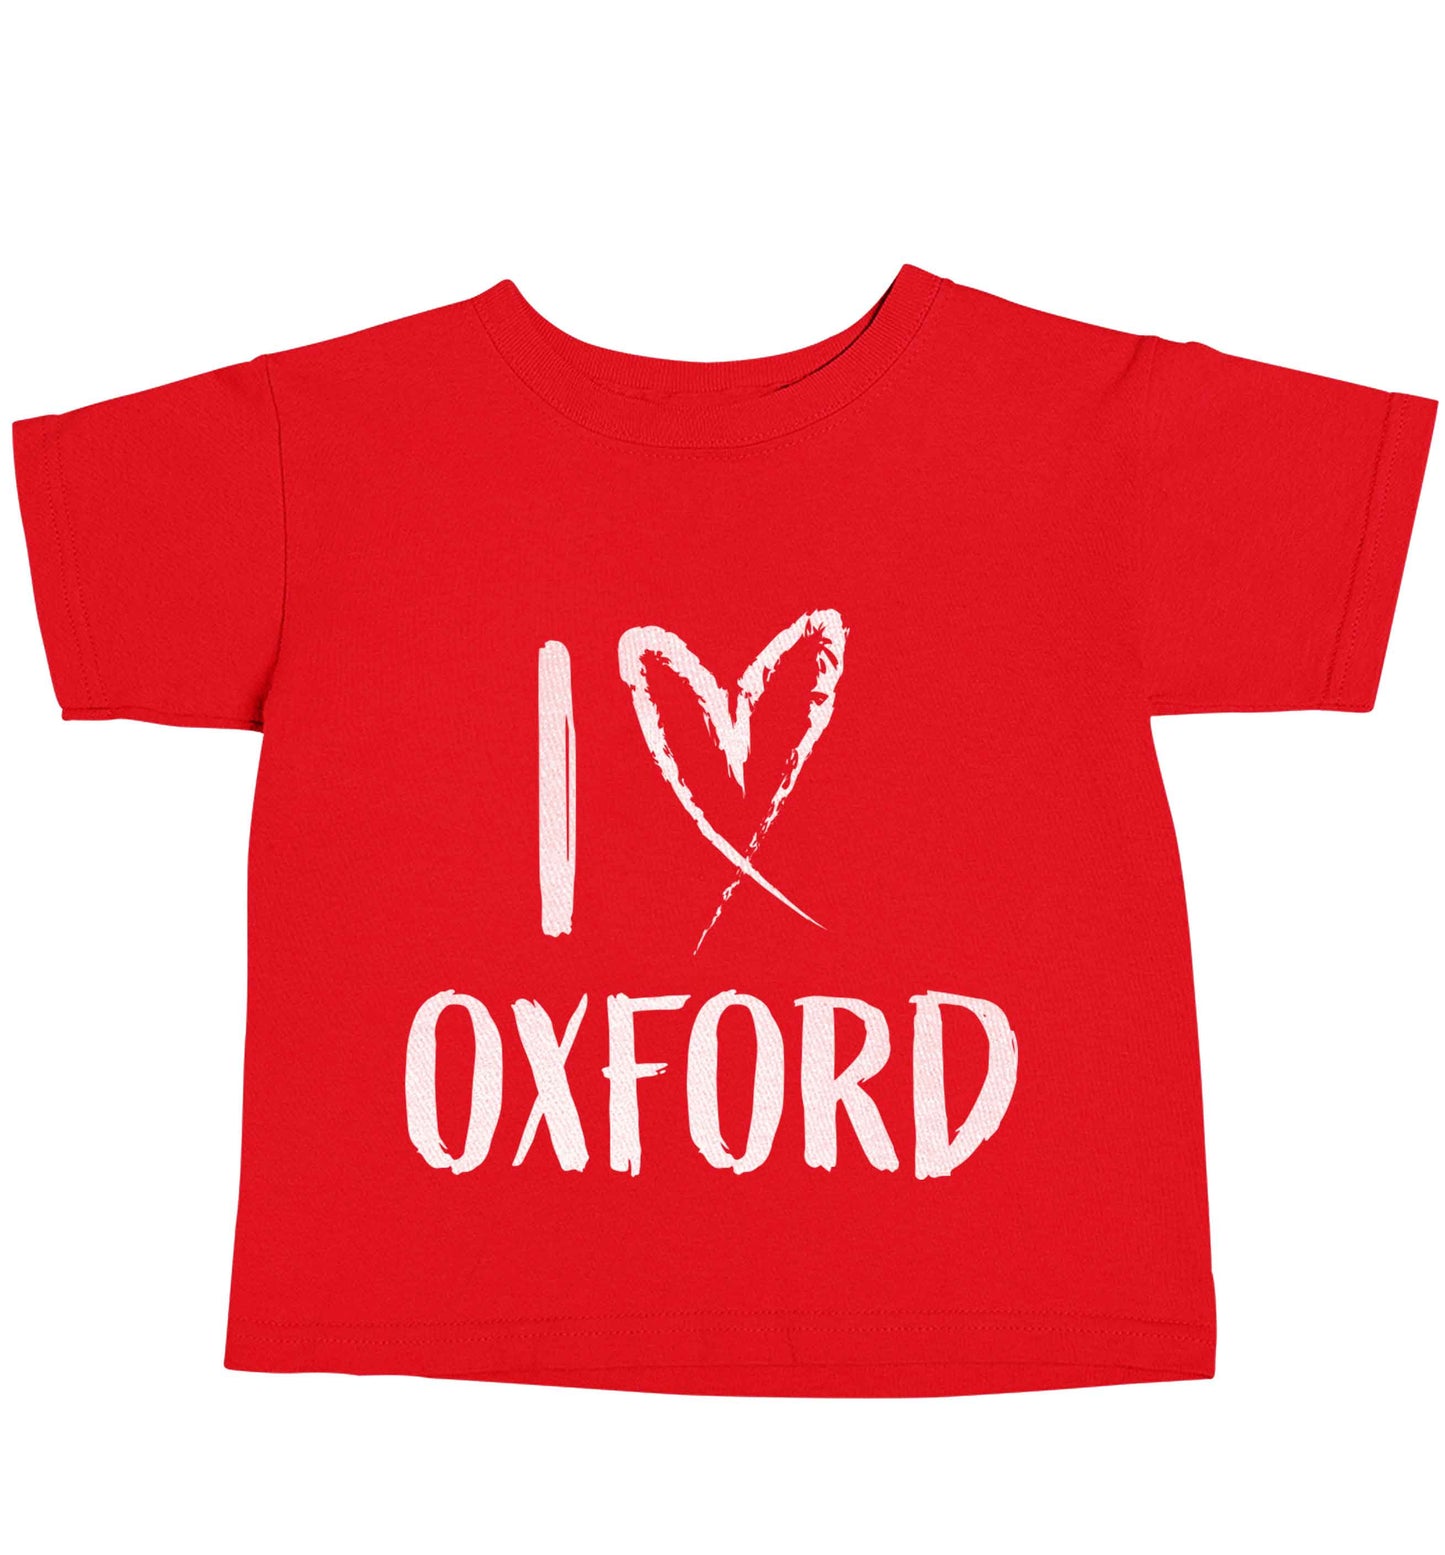 I love Oxford red baby toddler Tshirt 2 Years